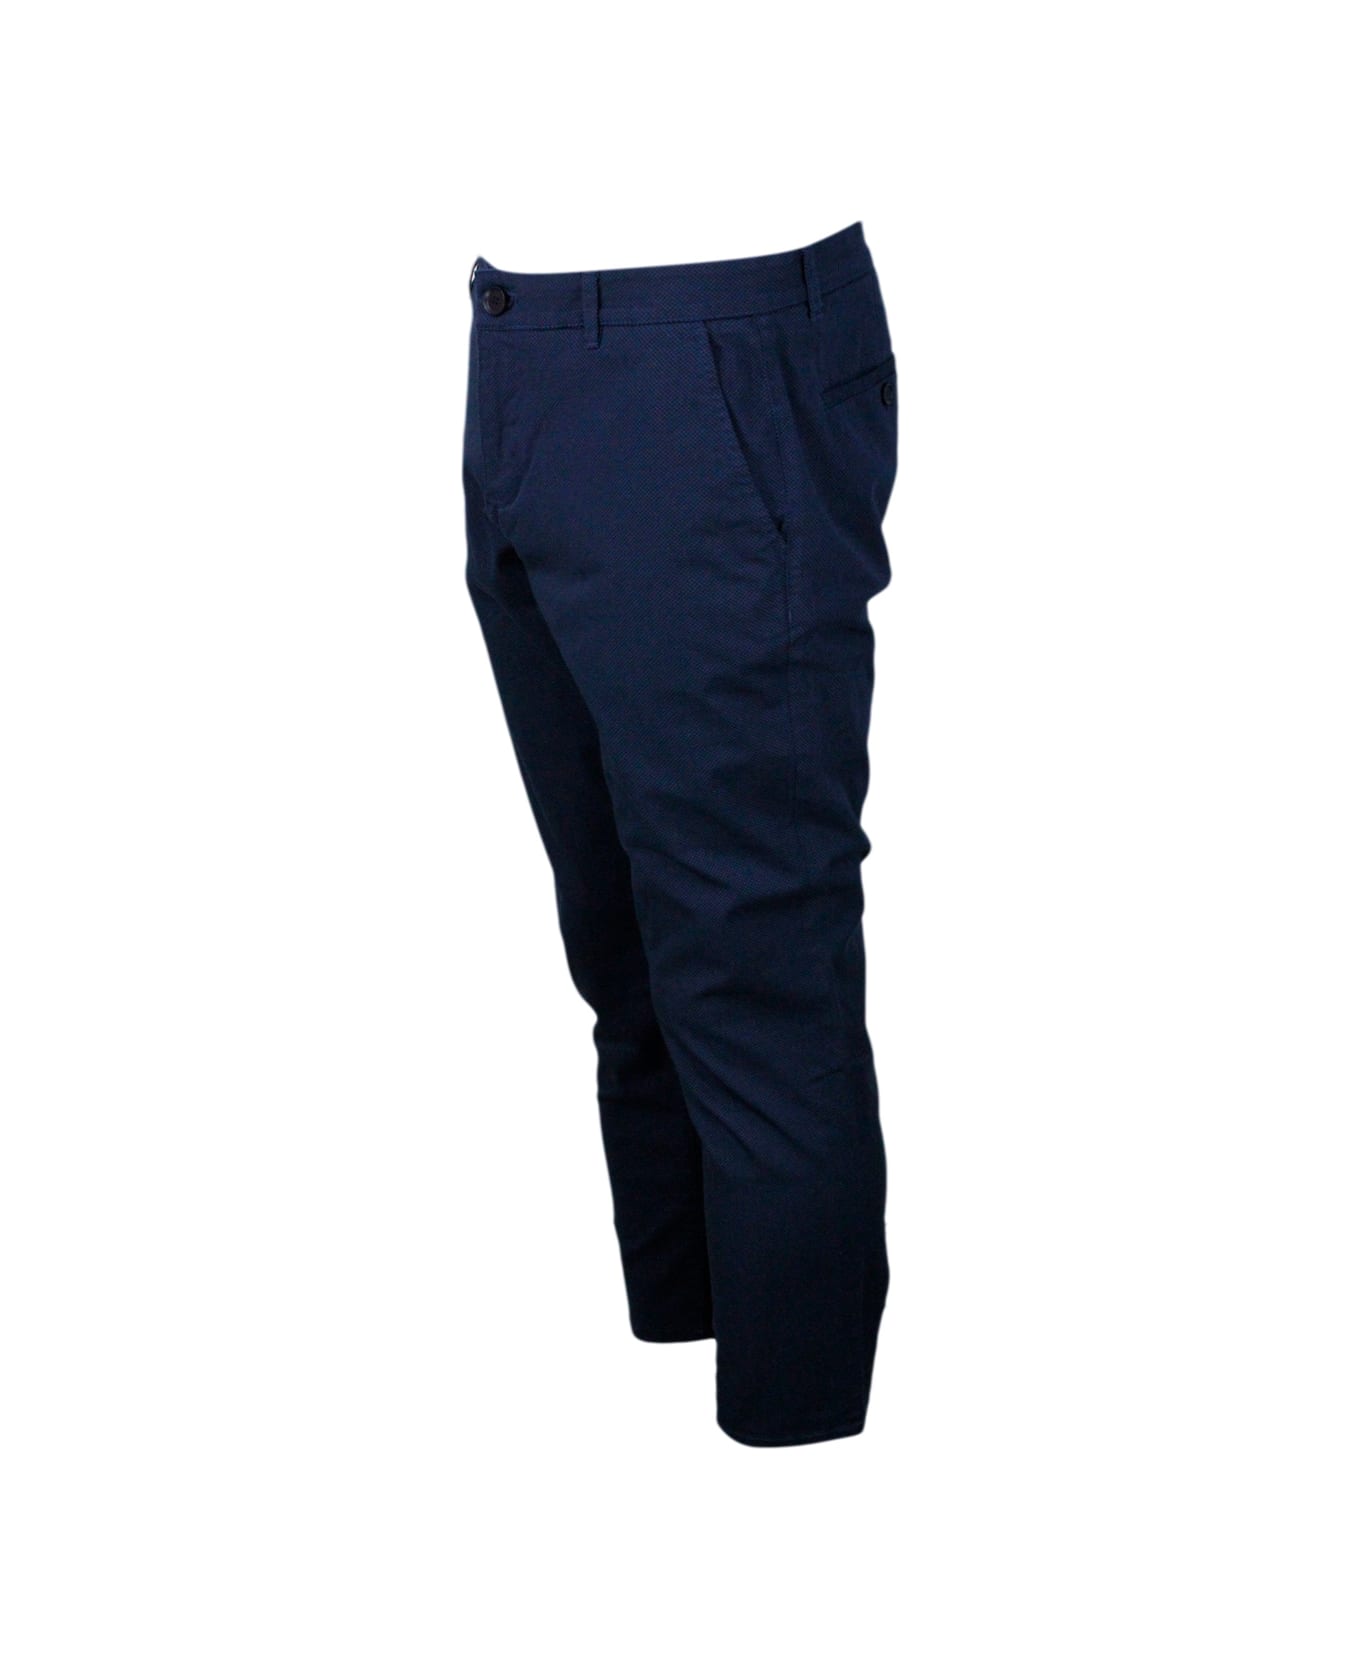 Armani Collezioni Stretch Cotton Trousers With Welt Pockets And Zip And Button Closure - Blue